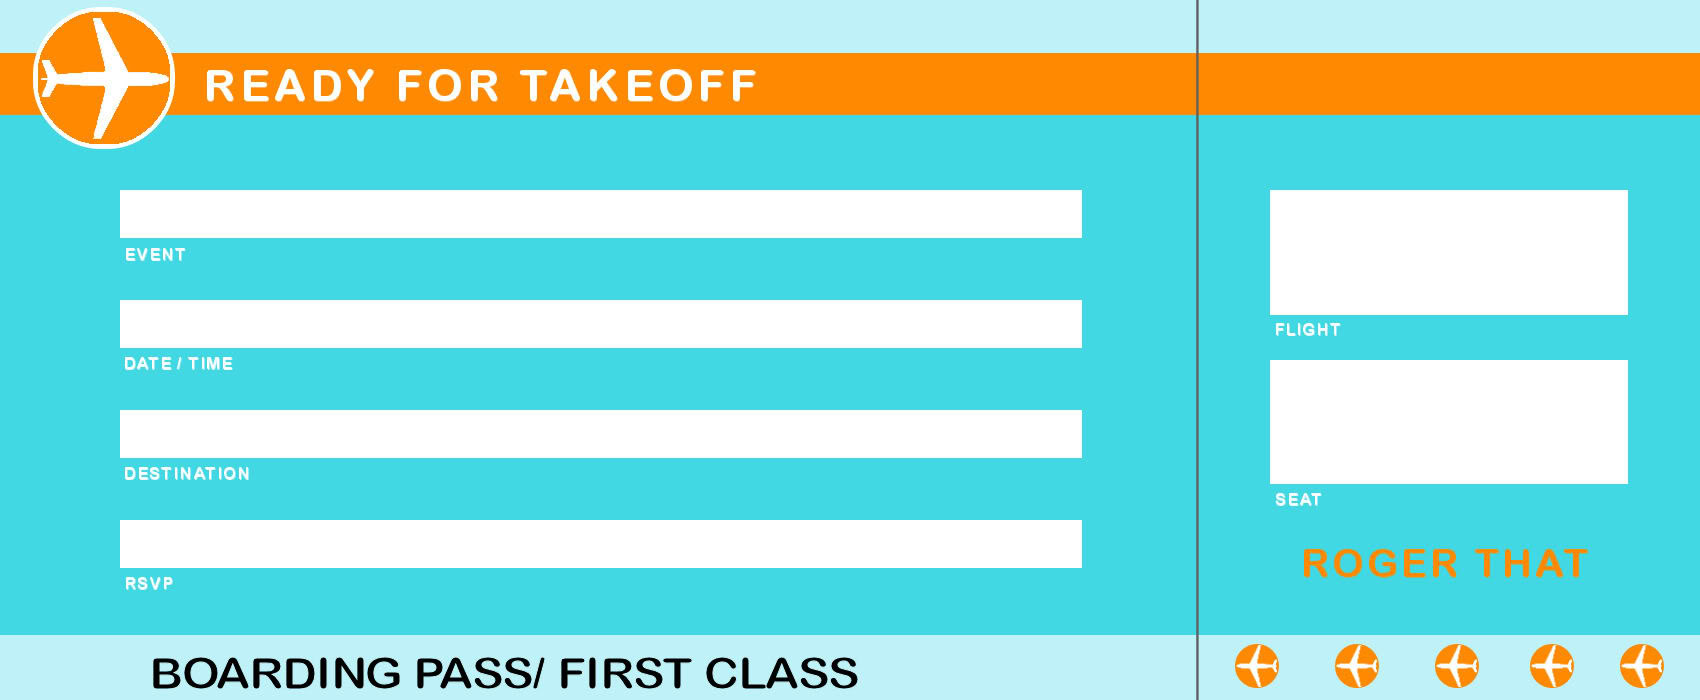 better-free-printable-airline-ticket-templates